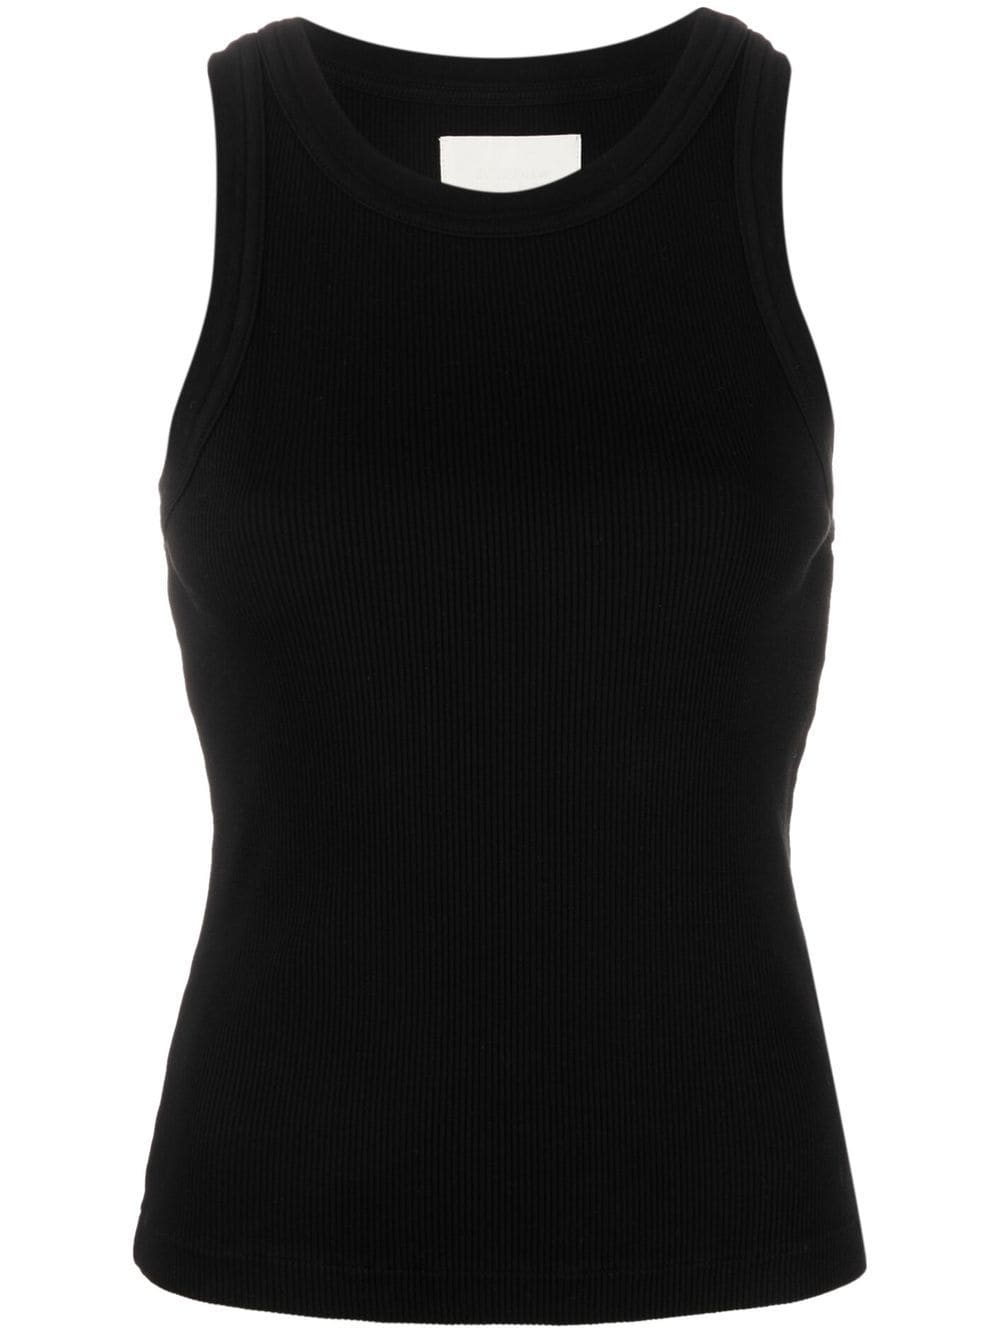 Citizens of Humanity sleeveless ribbed top - Black von Citizens of Humanity